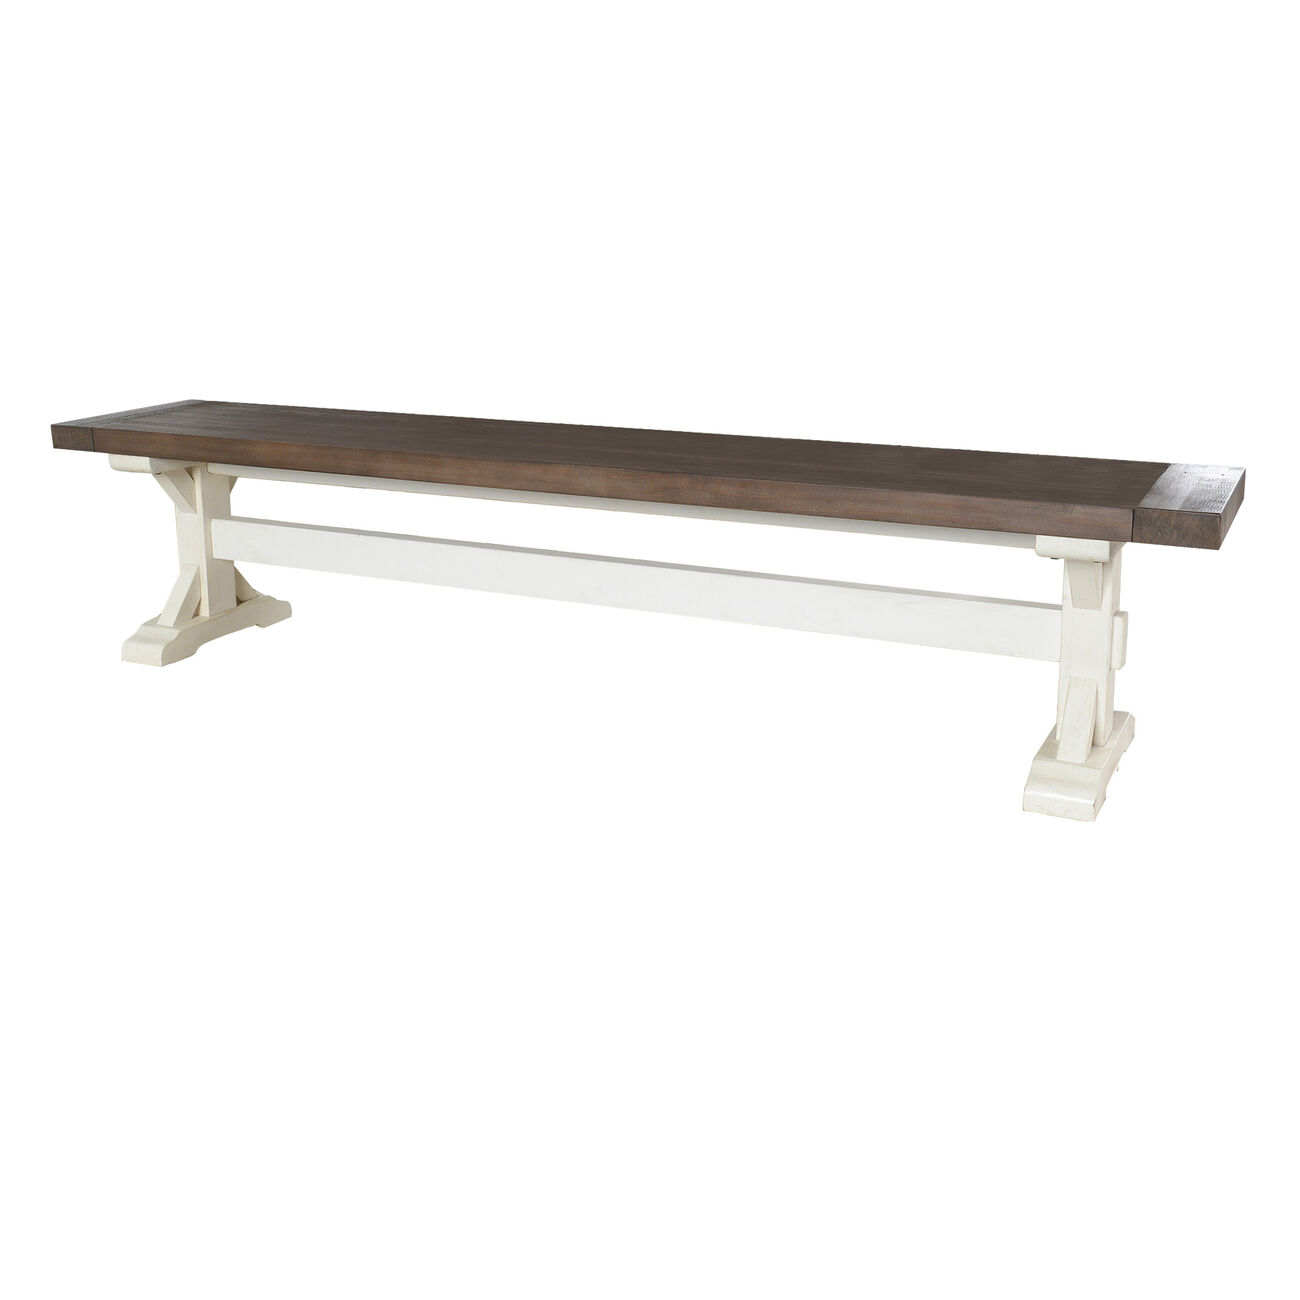 Two Tone Wooden Bench with Trestle Base, Brown and White